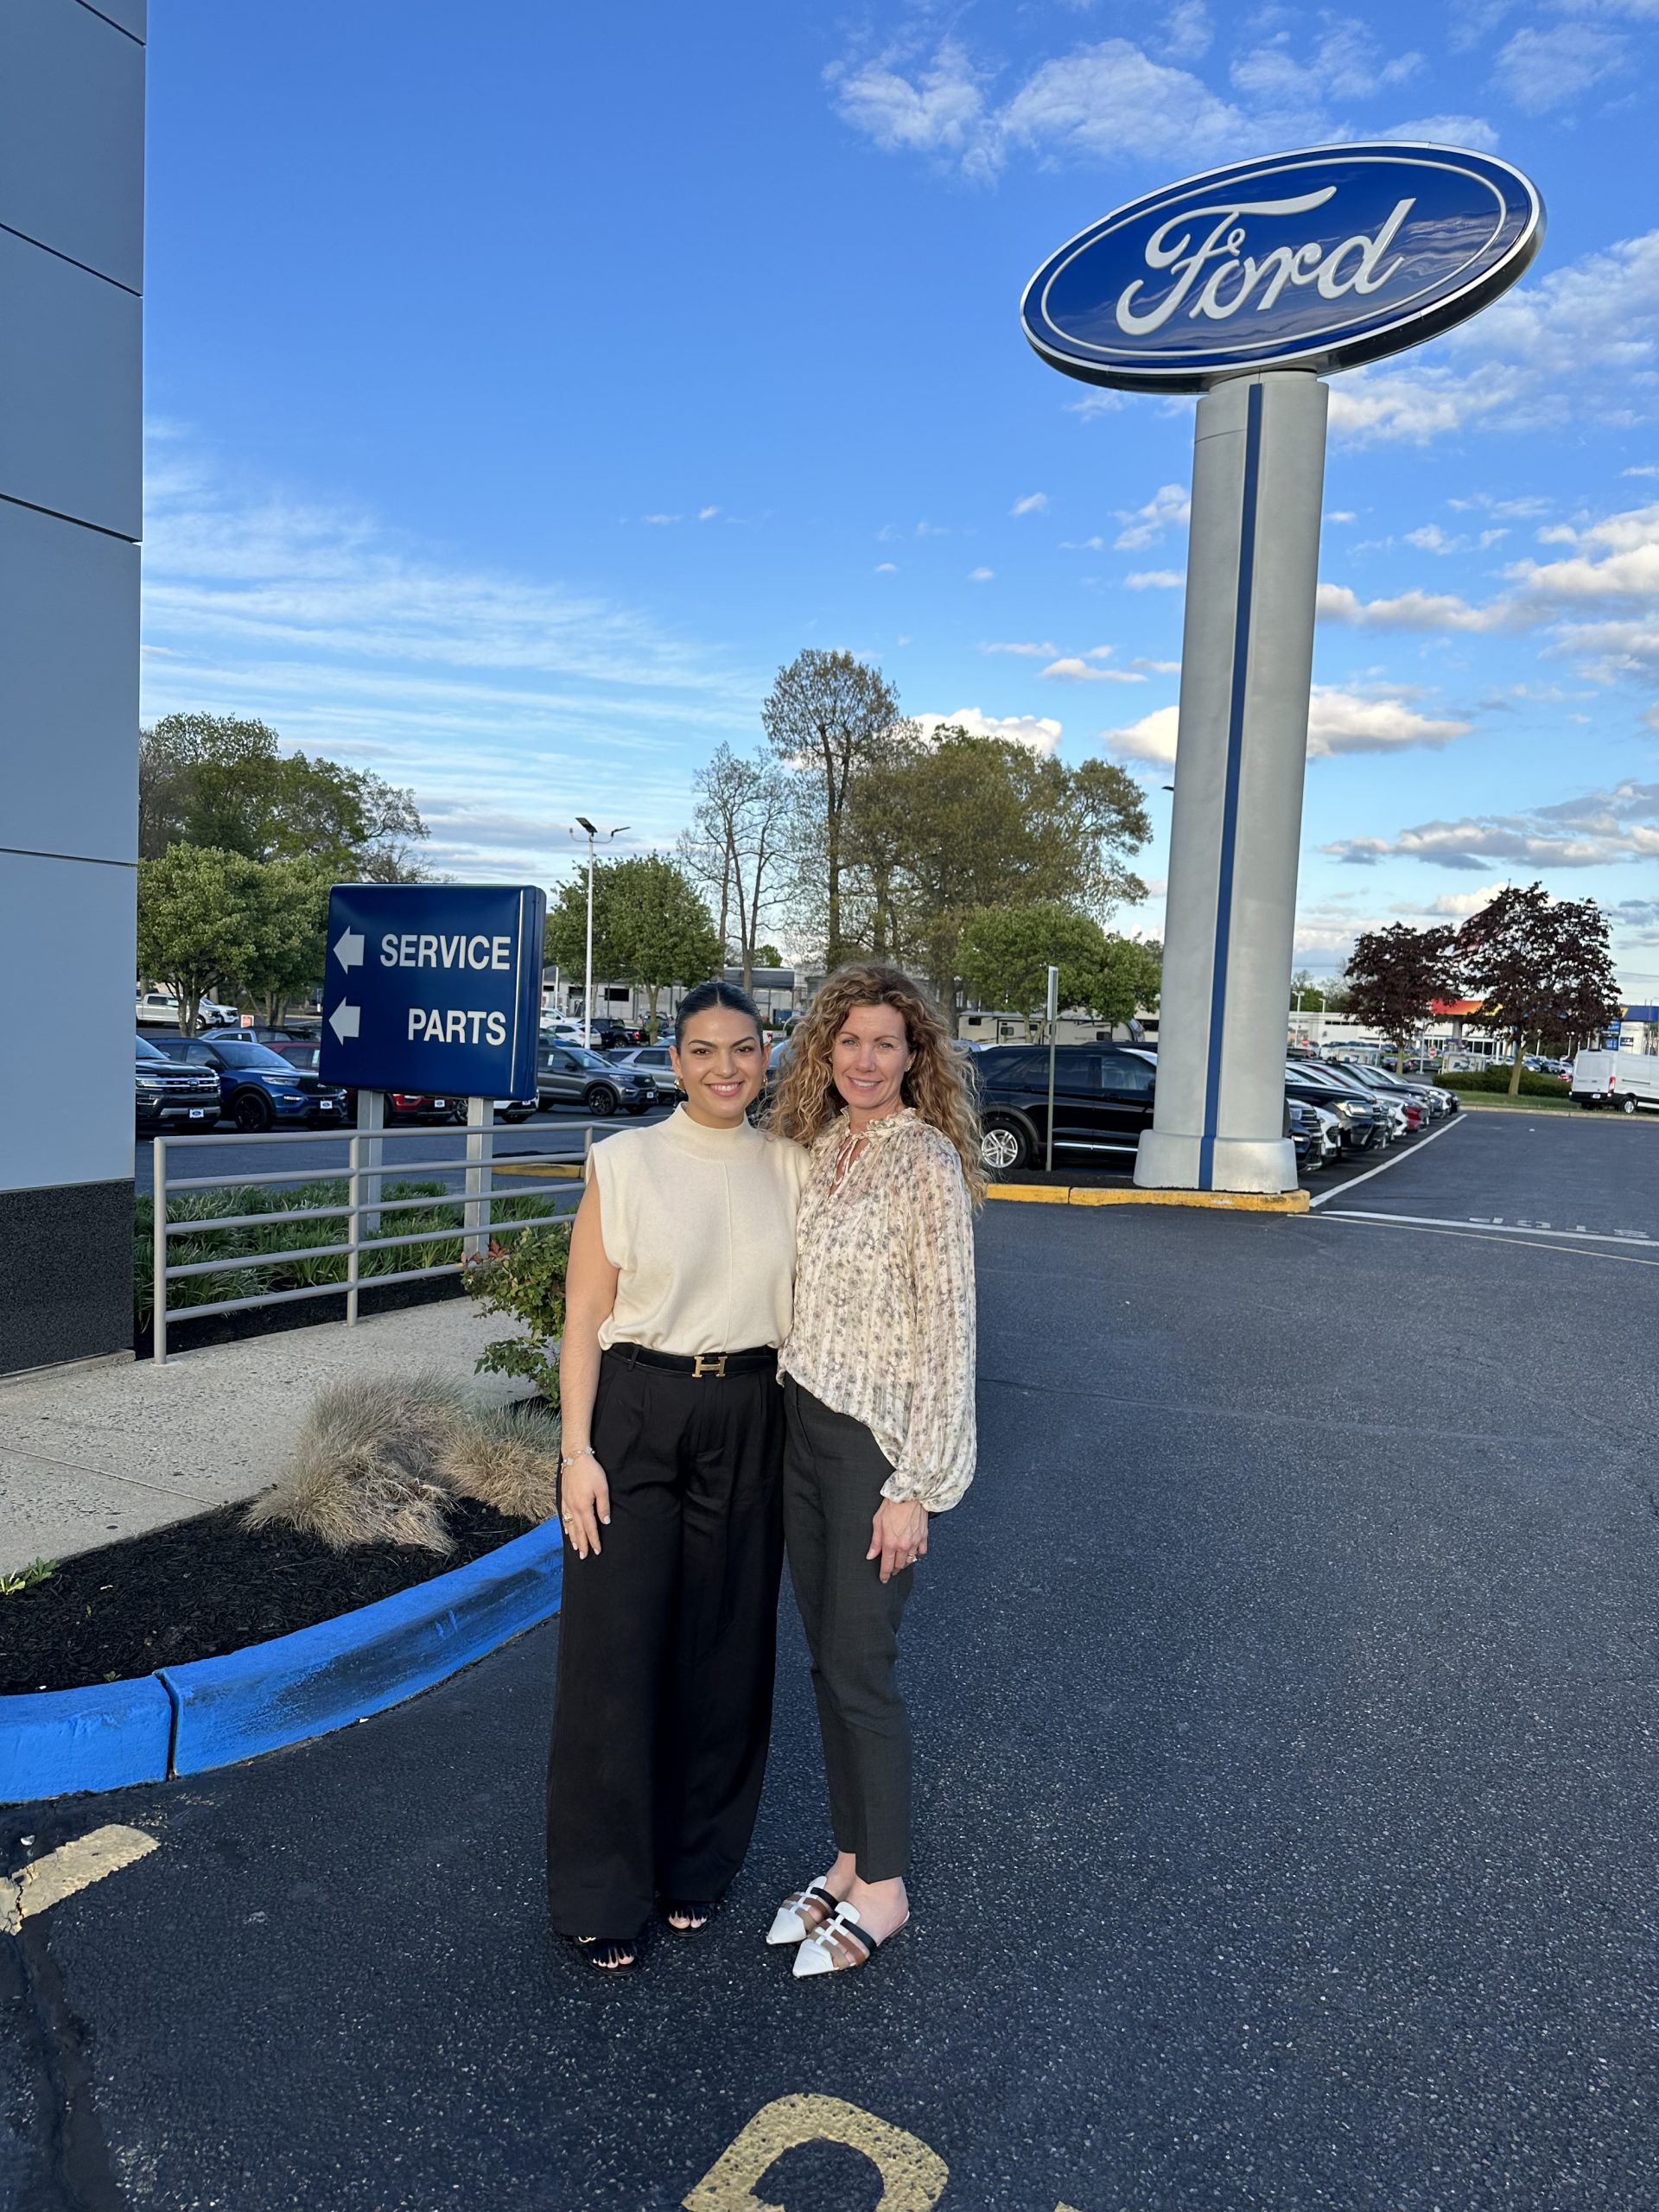 Veronica Maoli of Celebrity Motor Cars has purchased Downs Ford in Toms River, NJ from Melissa Longo